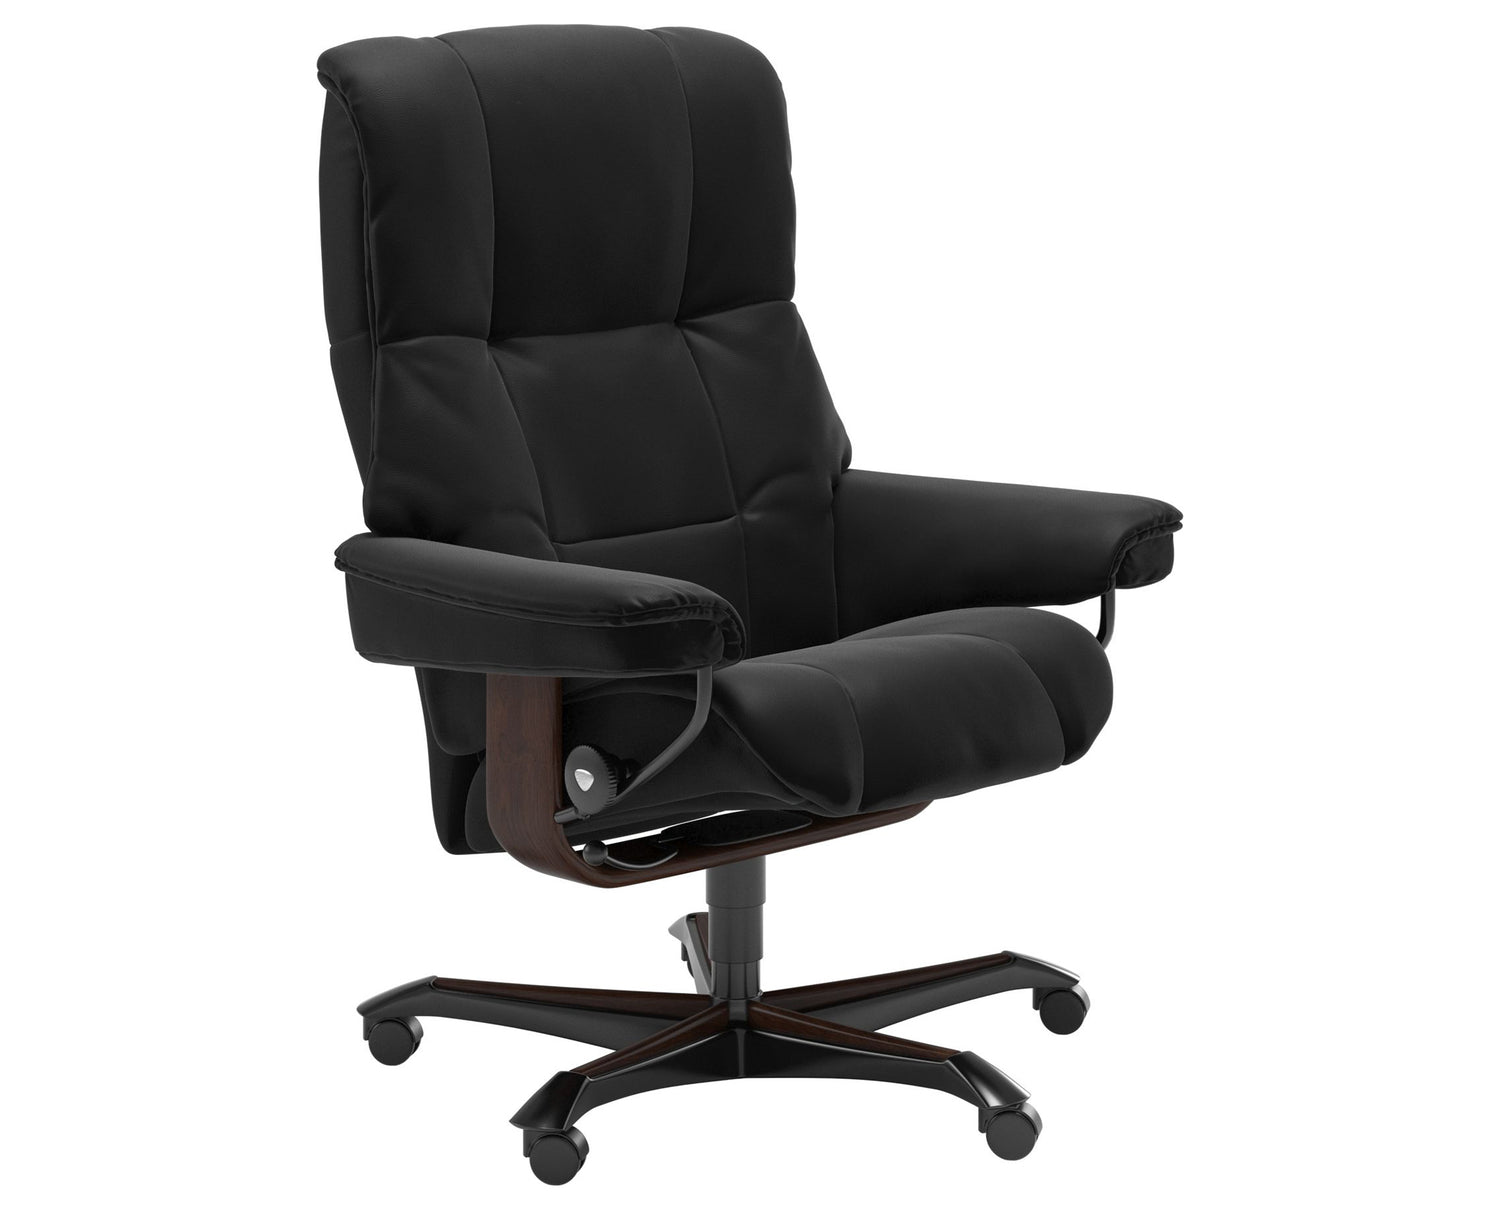 Paloma Leather Black M & Brown Base | Stressless Mayfair Home Office Chair | Valley Ridge Furniture